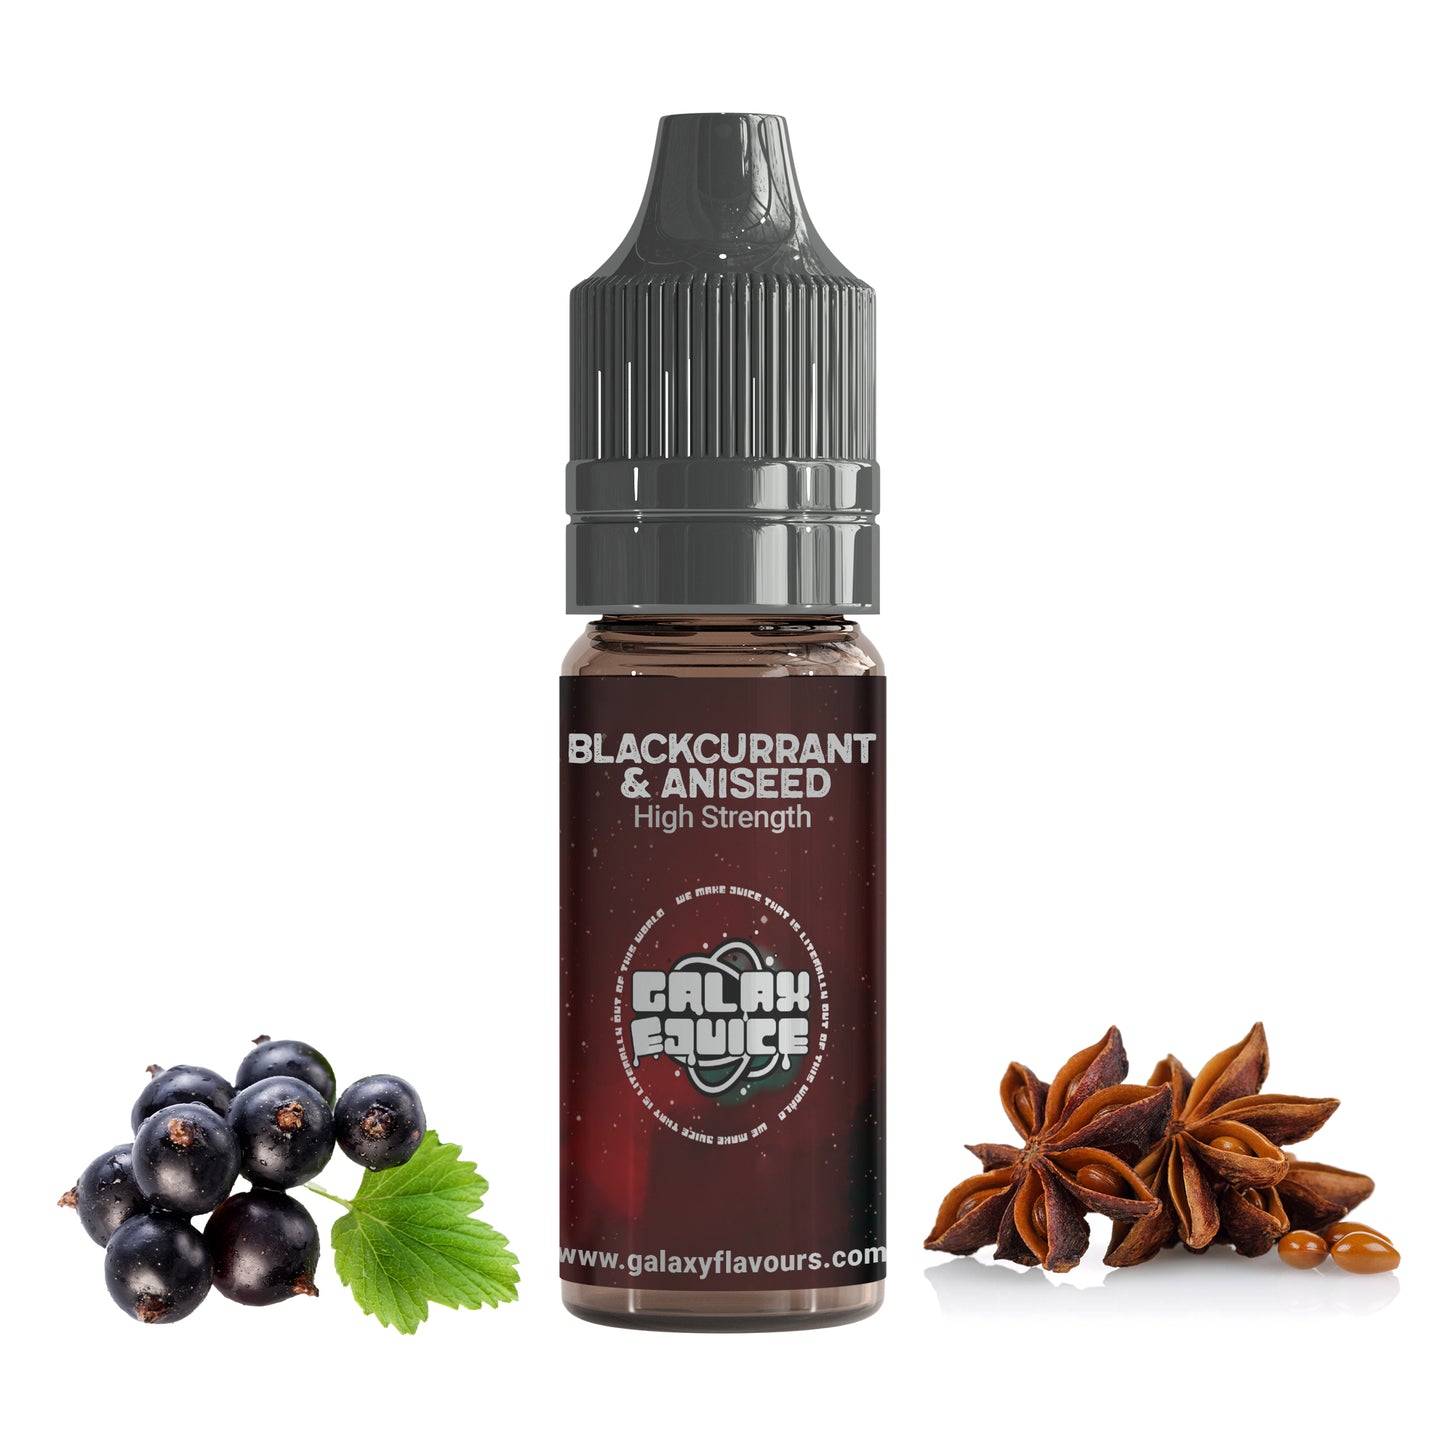 Blackcurrant and Aniseed High Strength Professional Flavouring.